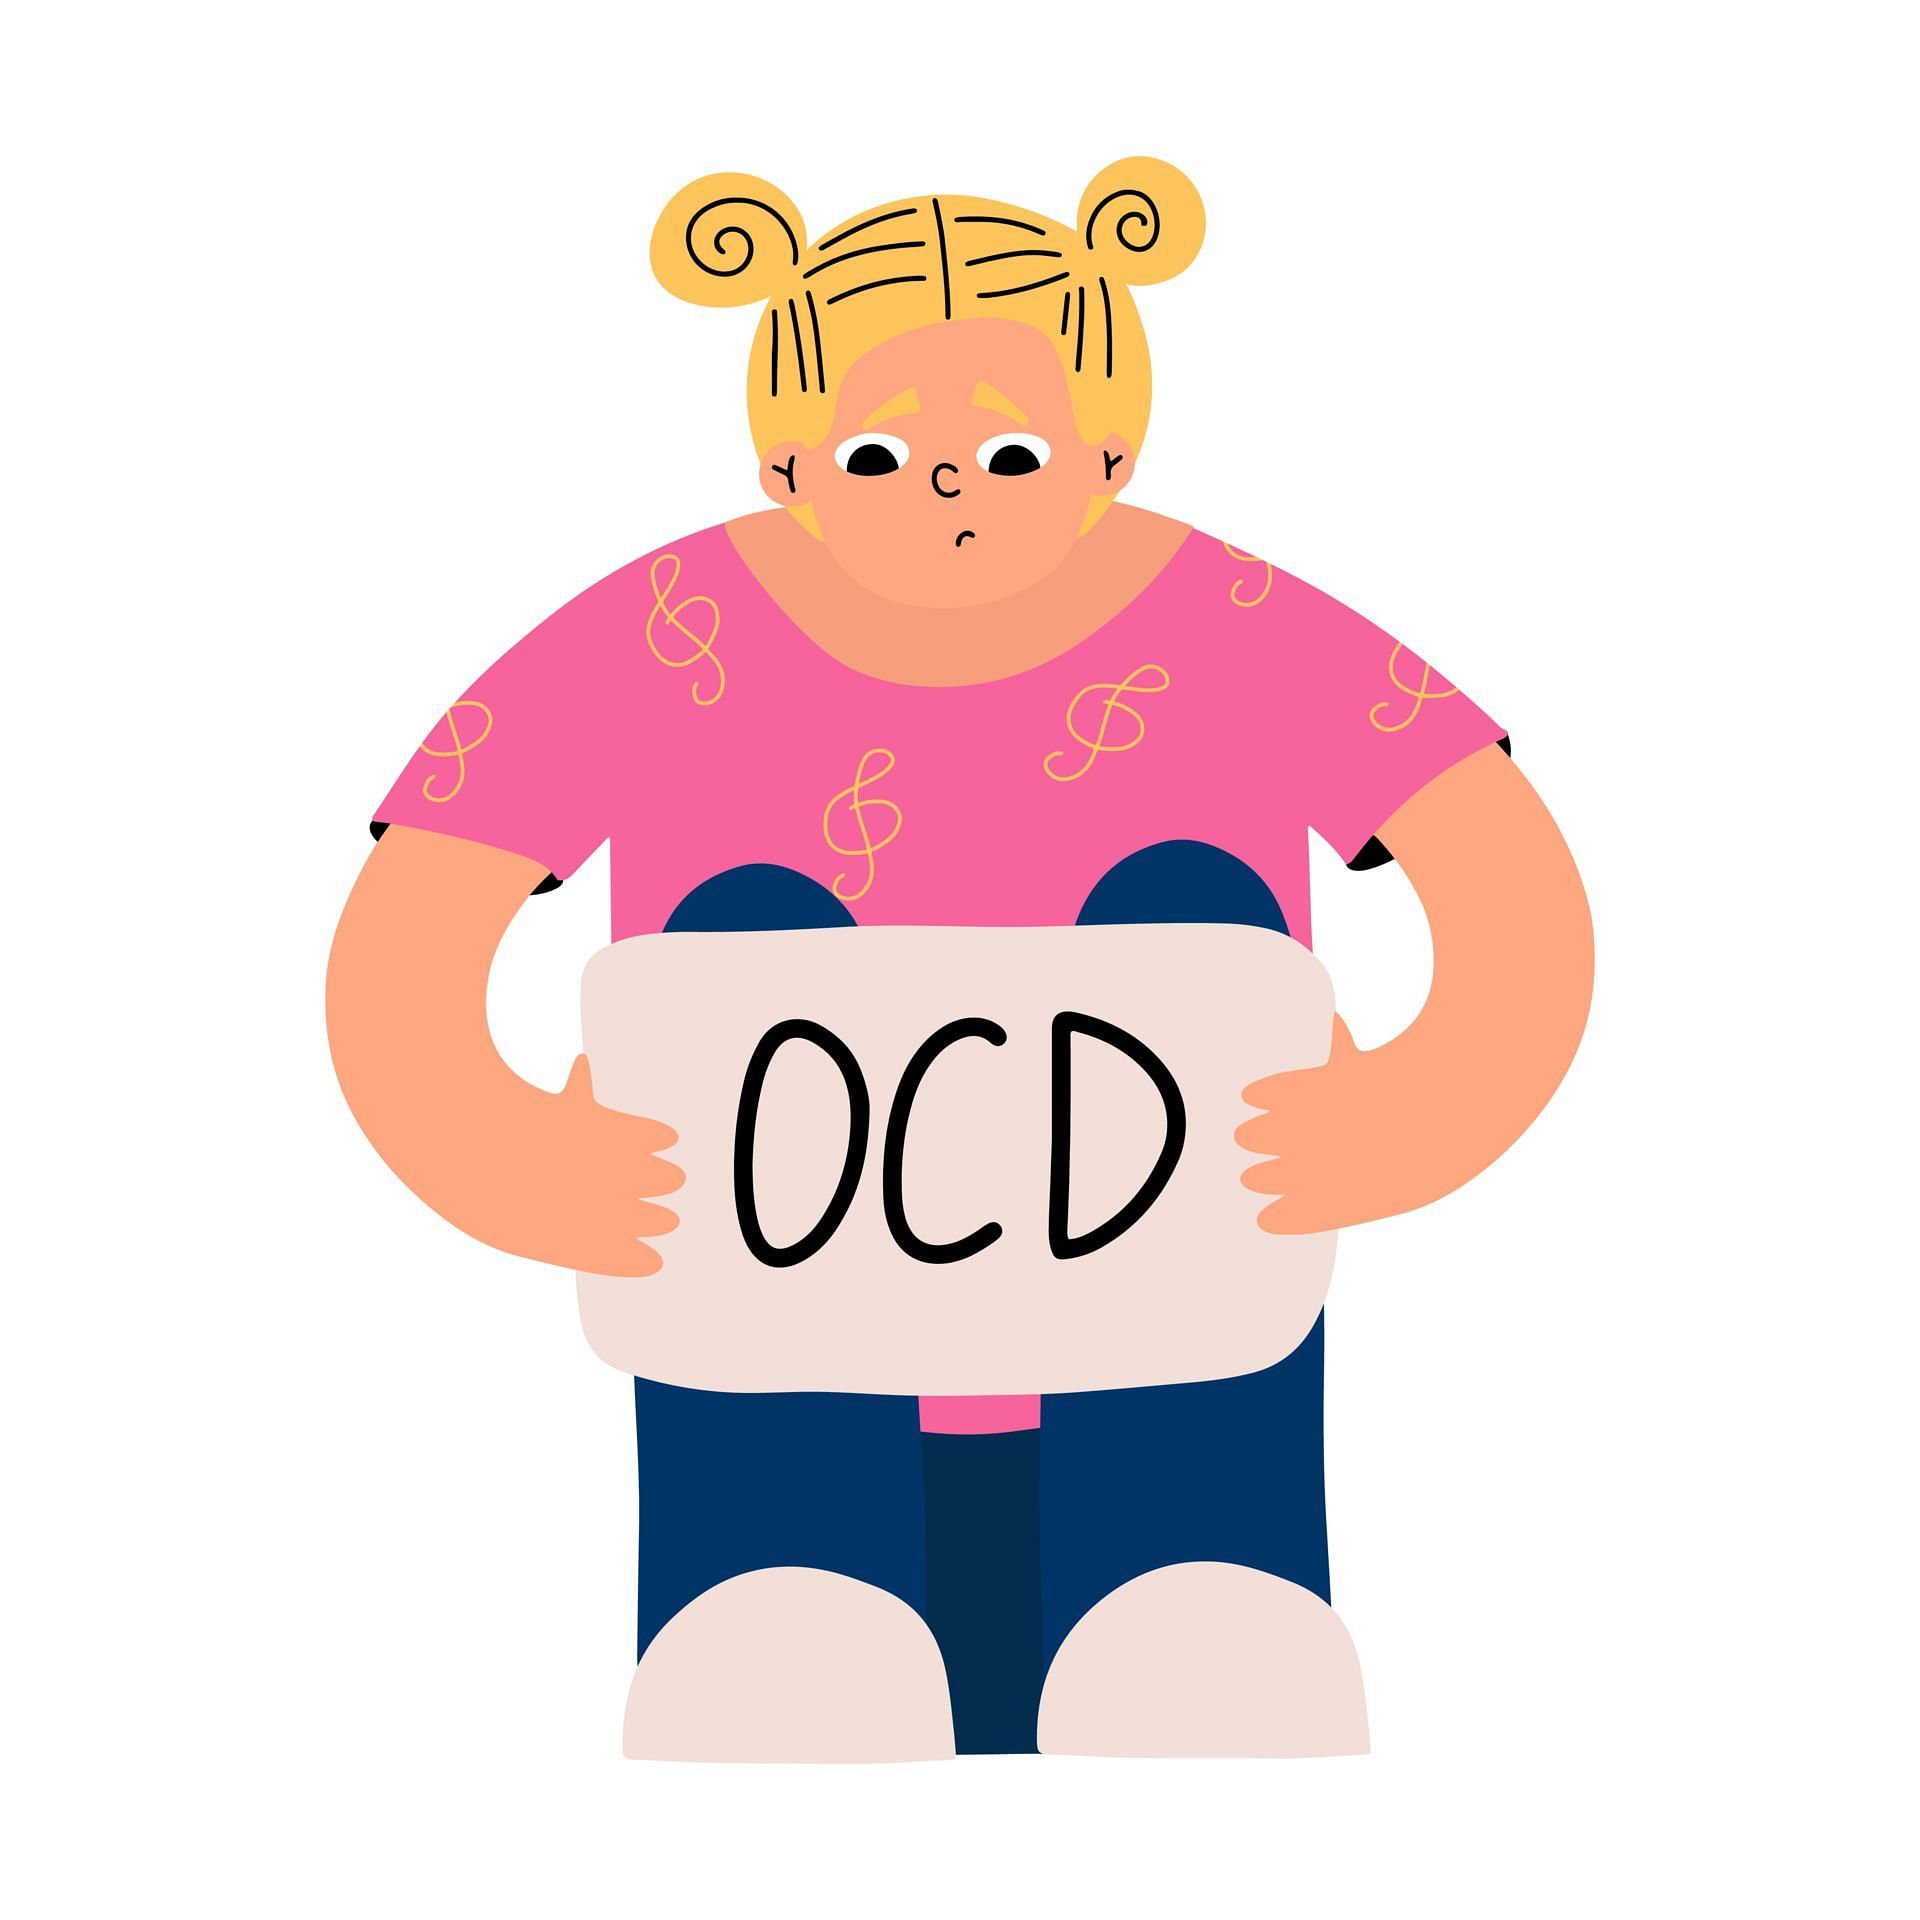 OCD is a not a casual word to be used. (Image via Vecteezy/ Vecteezy)